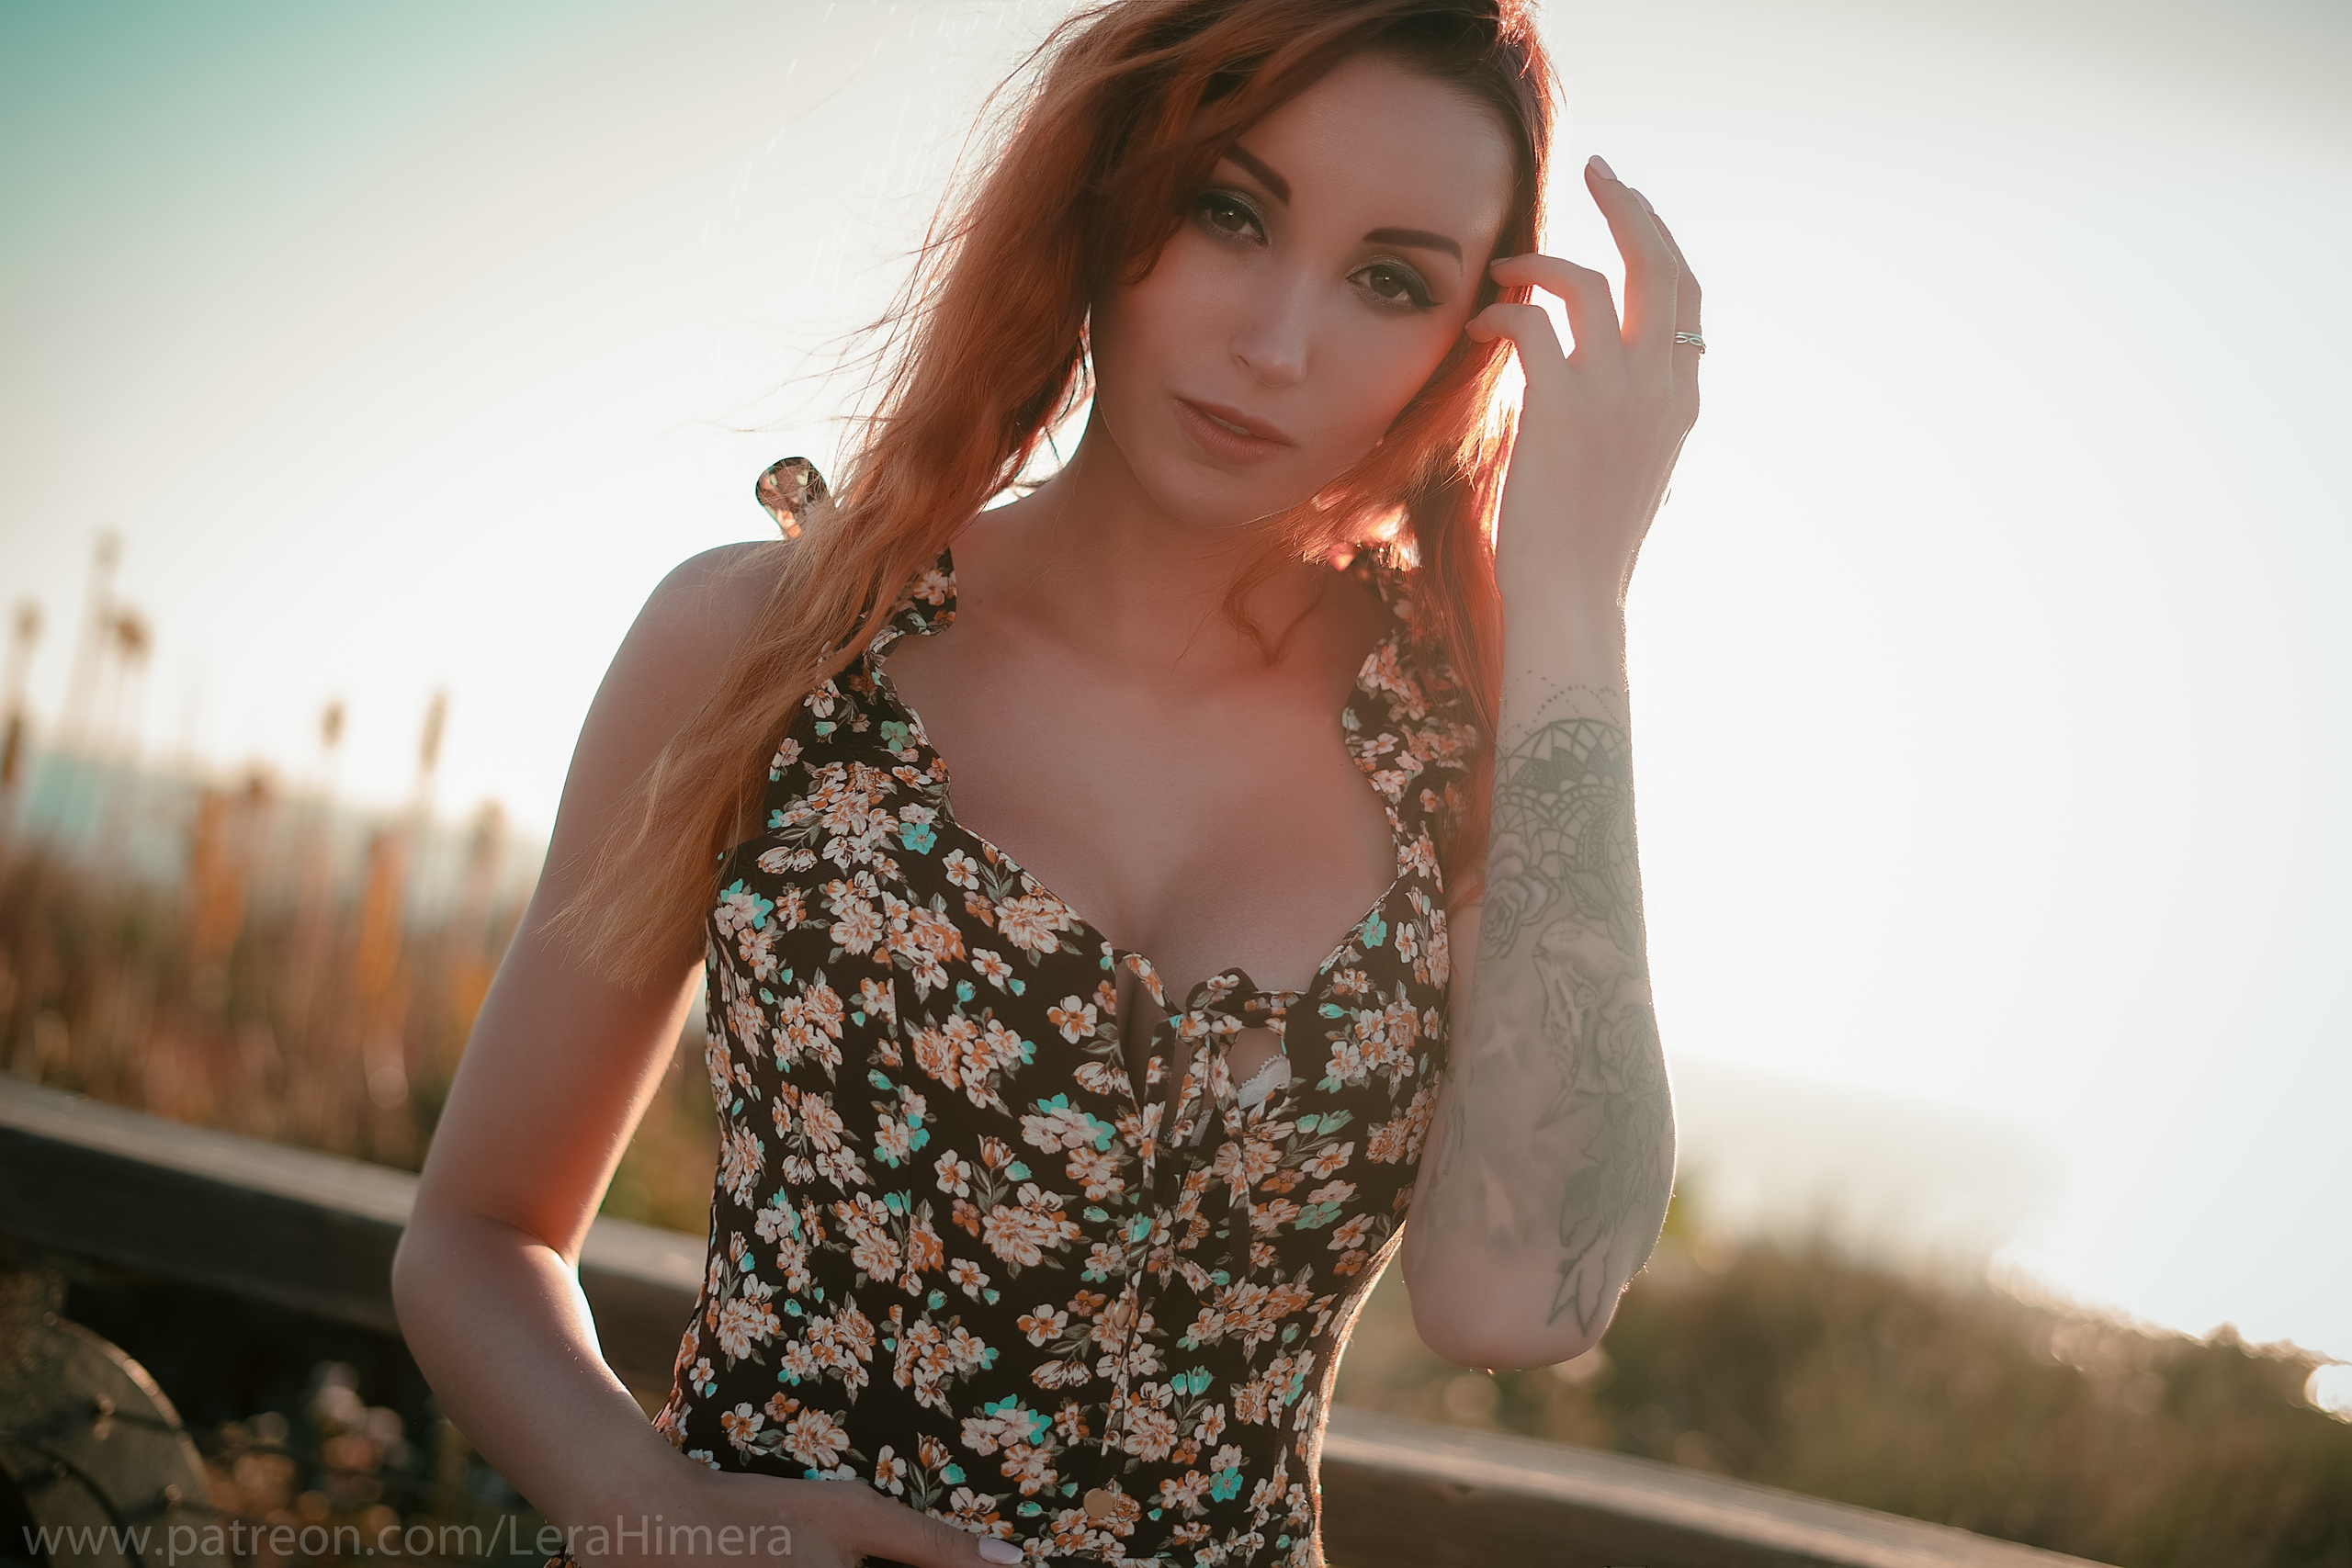 Valery Himera Women Model Redhead Long Hair Portrait Looking At Viewer Dress Outdoors Tattoo Inked G 2560x1707